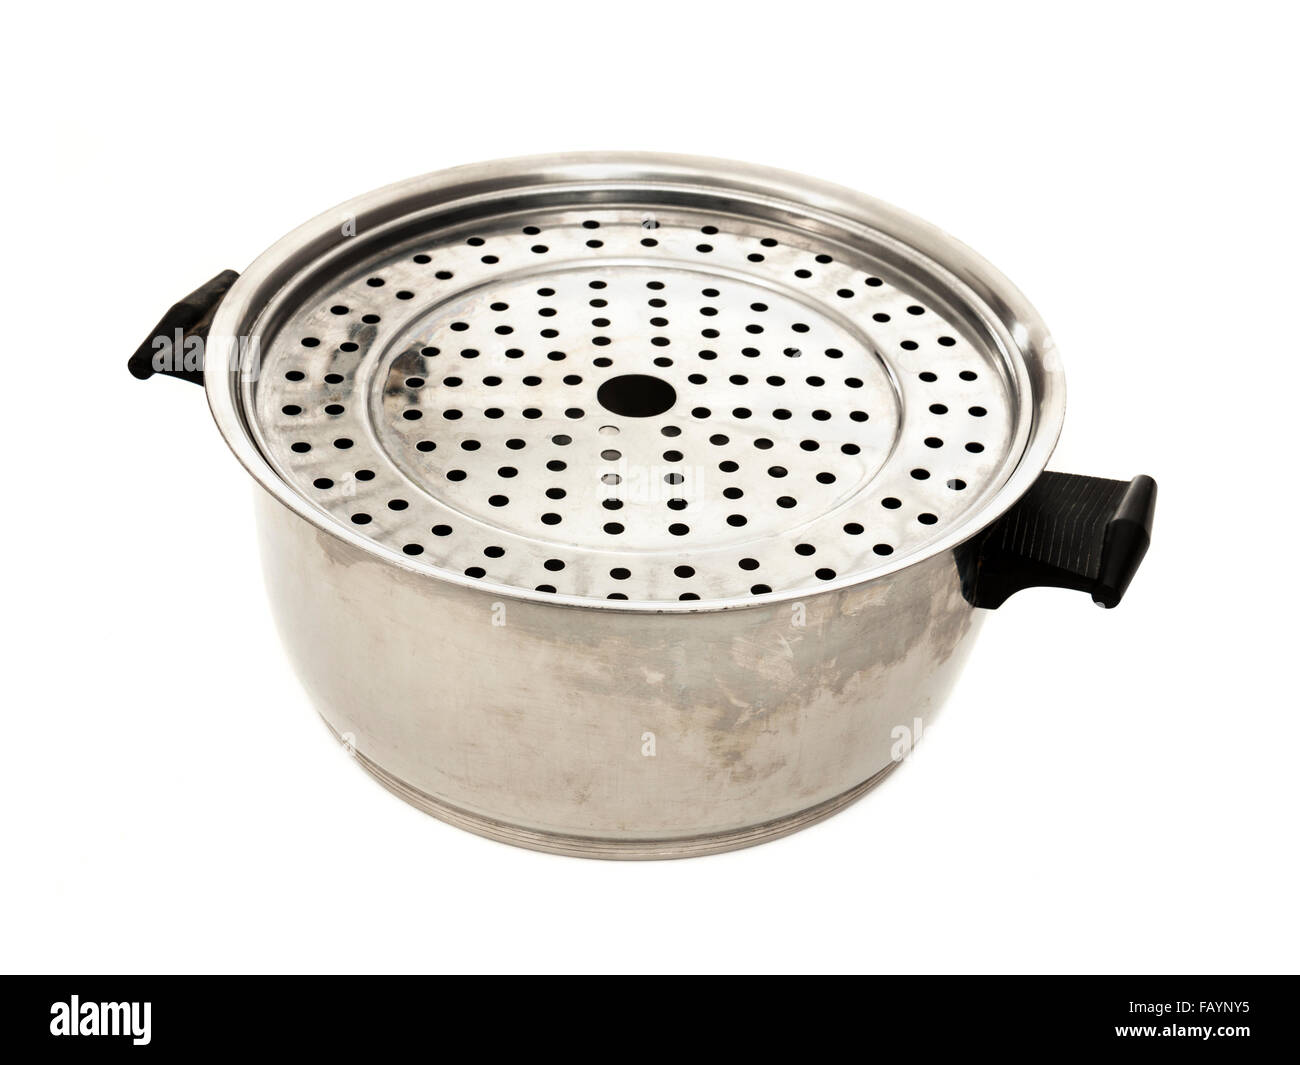 https://c8.alamy.com/comp/FAYNY5/rena-ware-waterless-stainless-cookware-FAYNY5.jpg